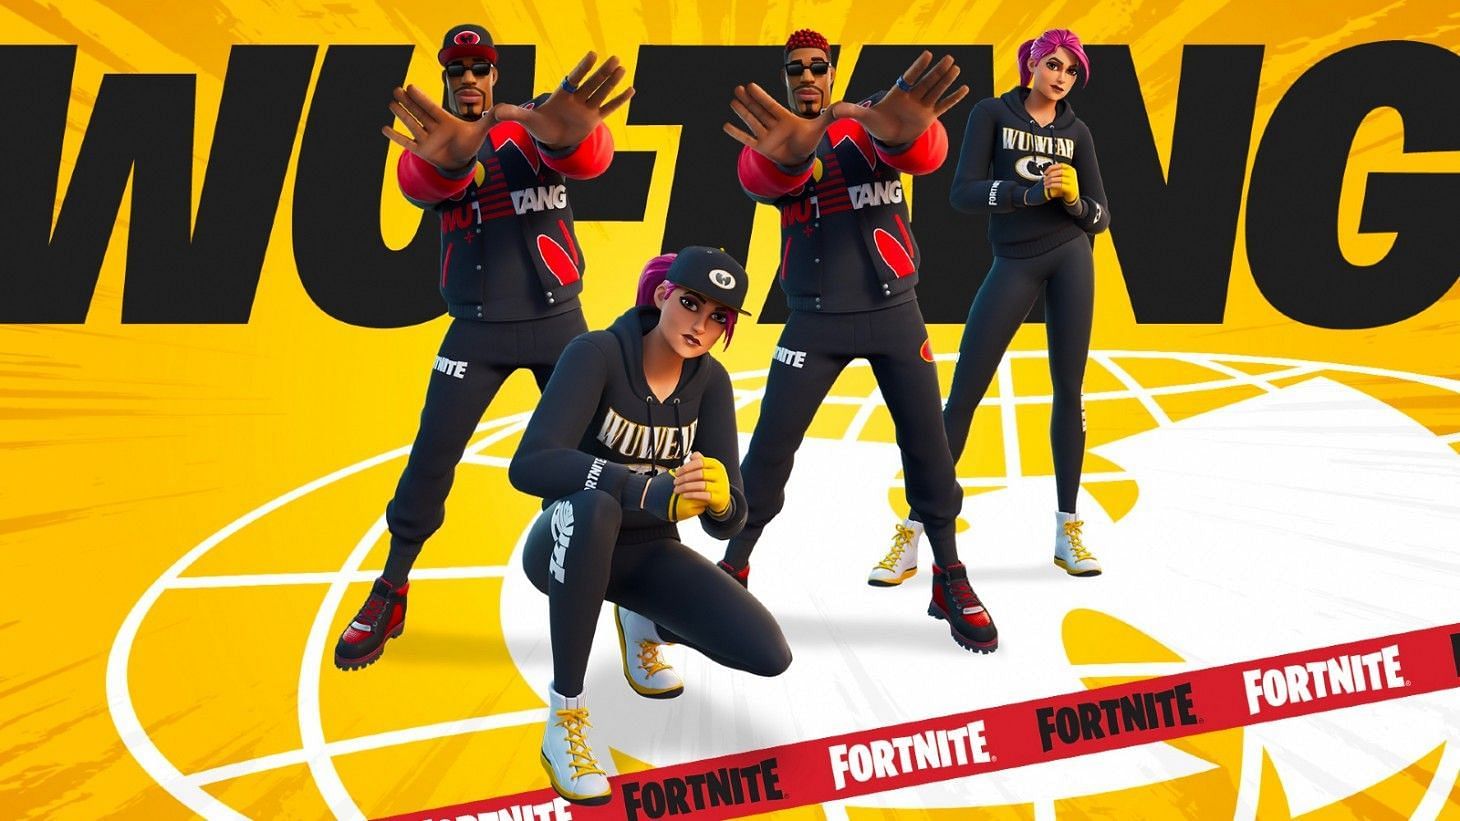 Wu-Tang Clan crossover (Image via Epic Games)